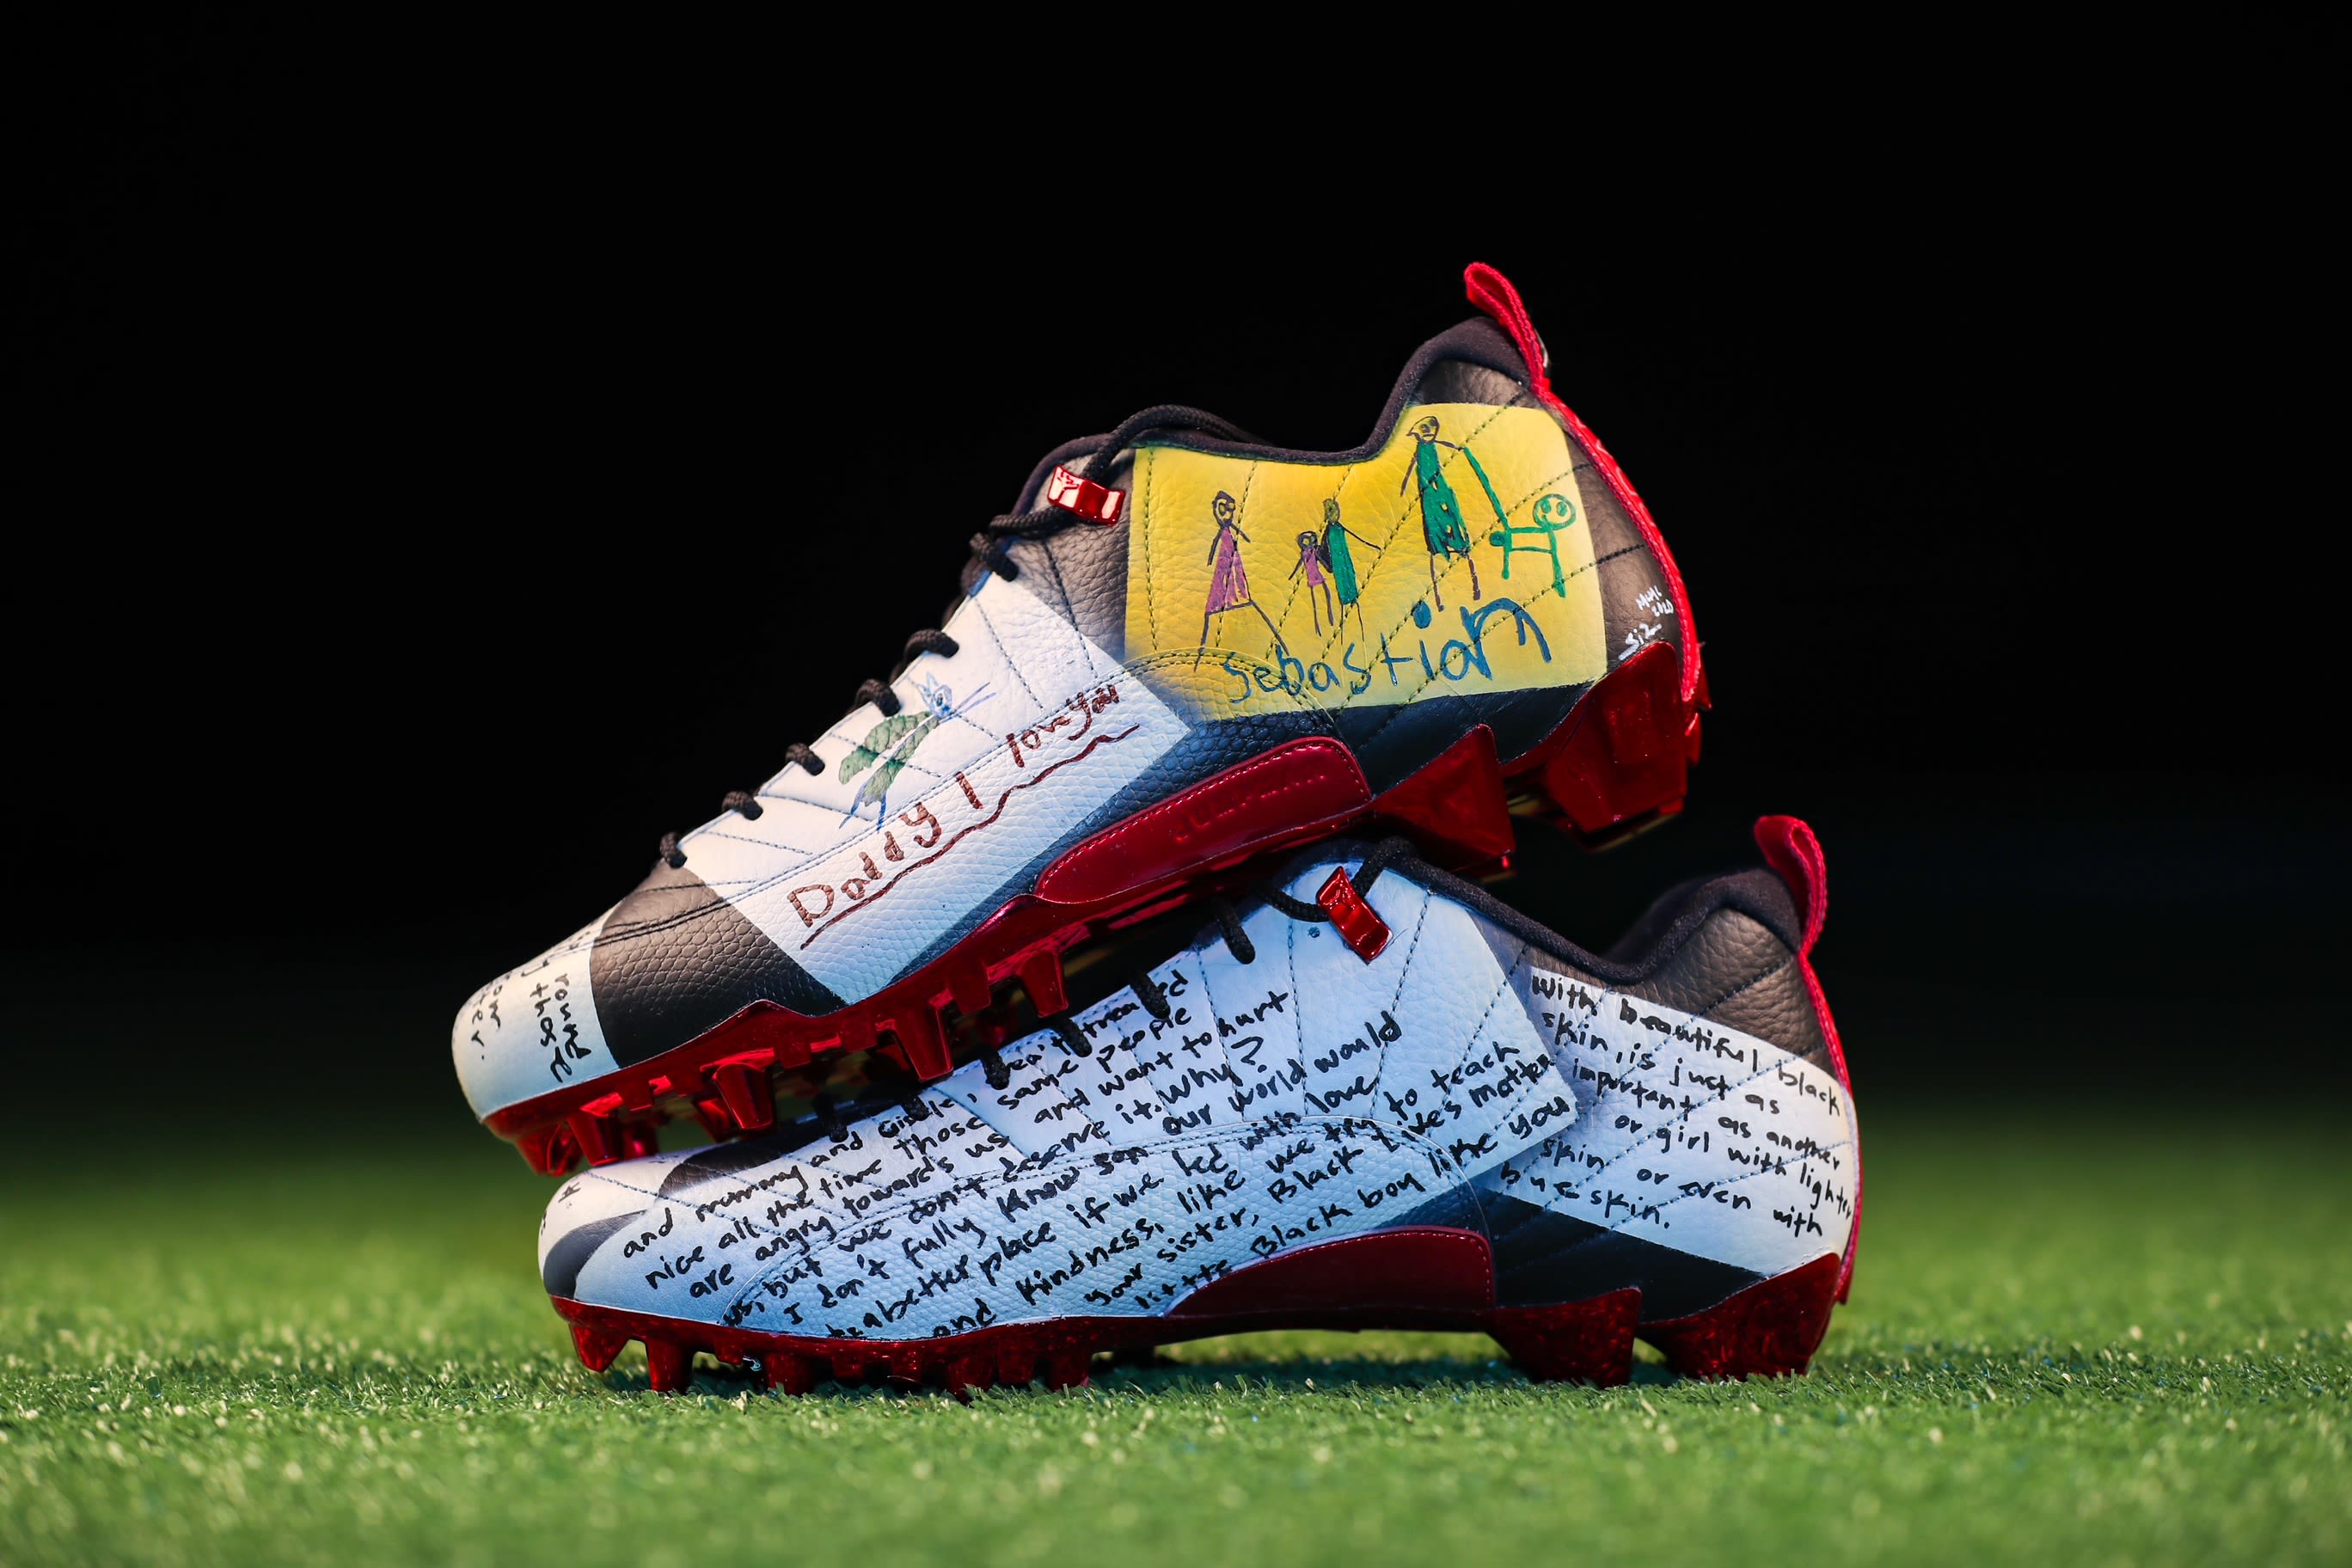 Stephon Gilmore Cleats